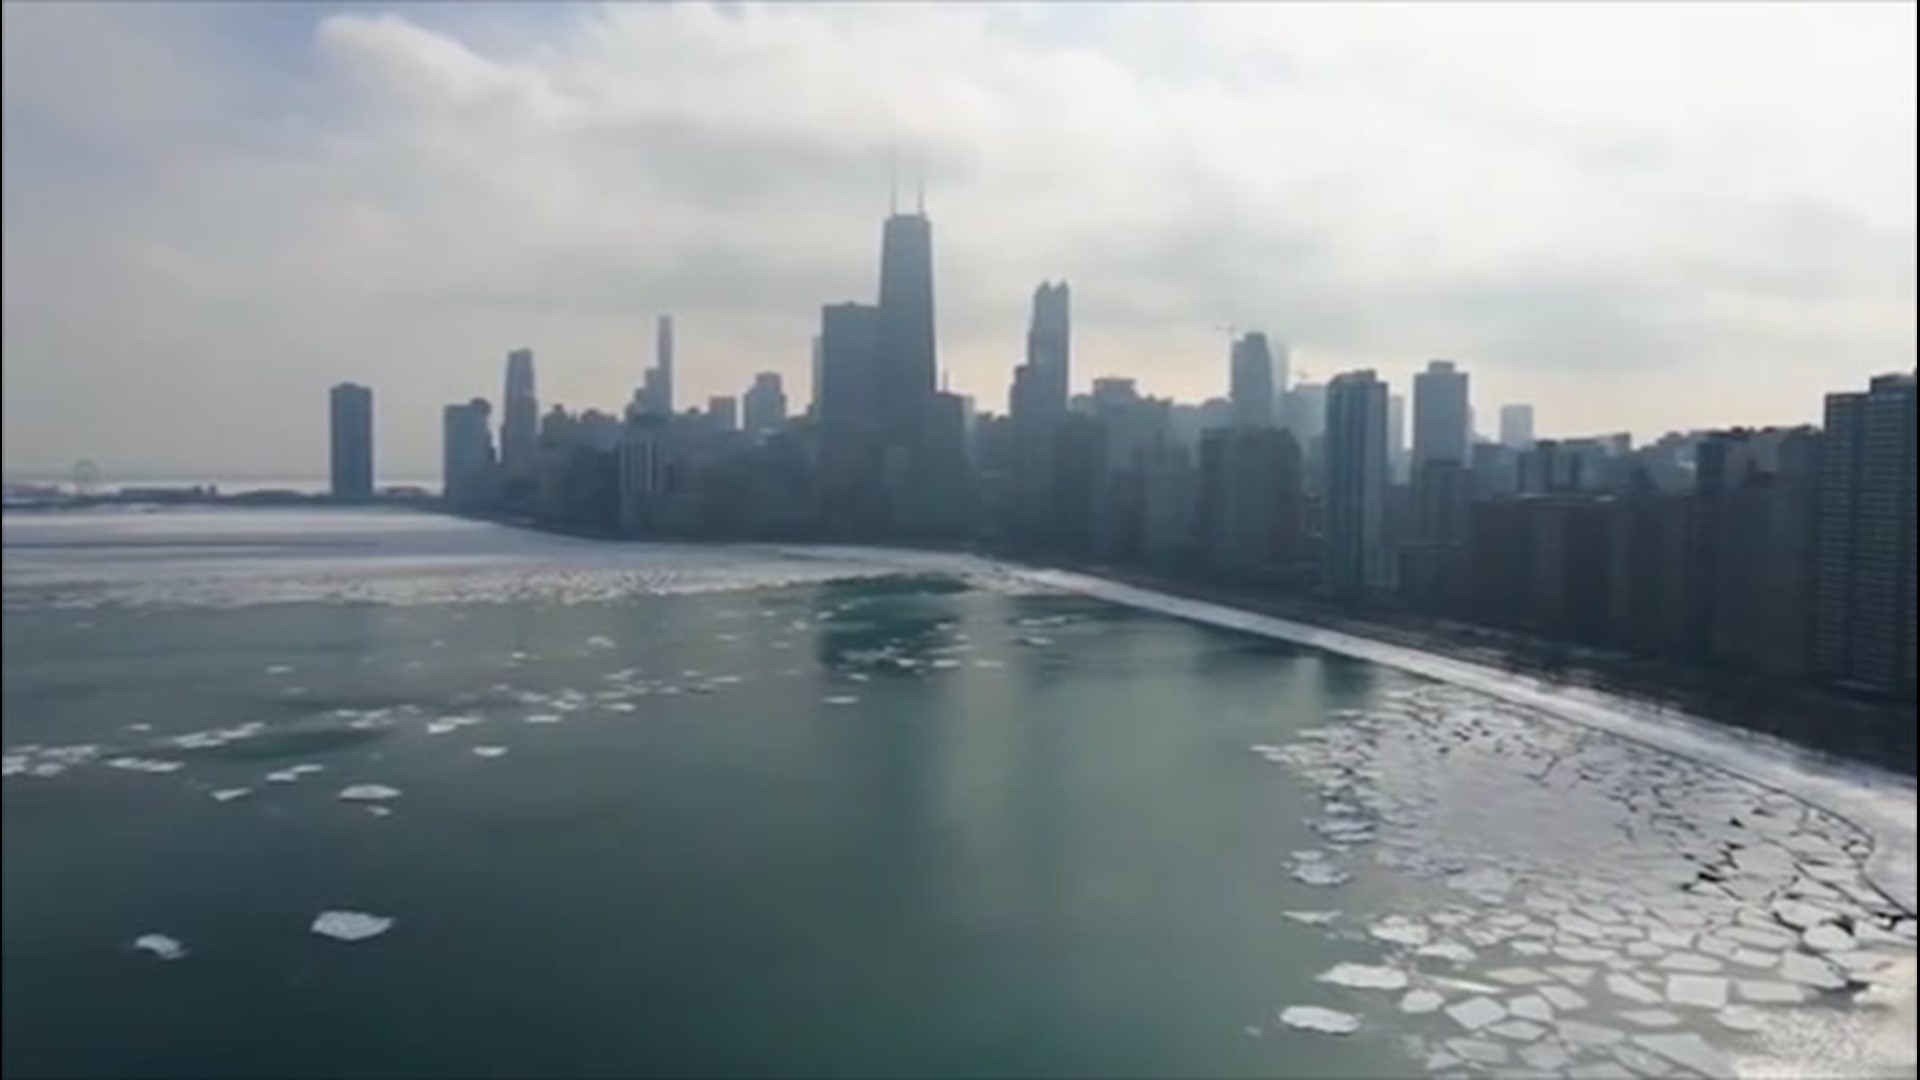 With clouds in the sky and ice starting to break apart on Lake Michigan, Instagram user @ravens_travel took to the air with a drone to capture this majestic view of the Windy City.